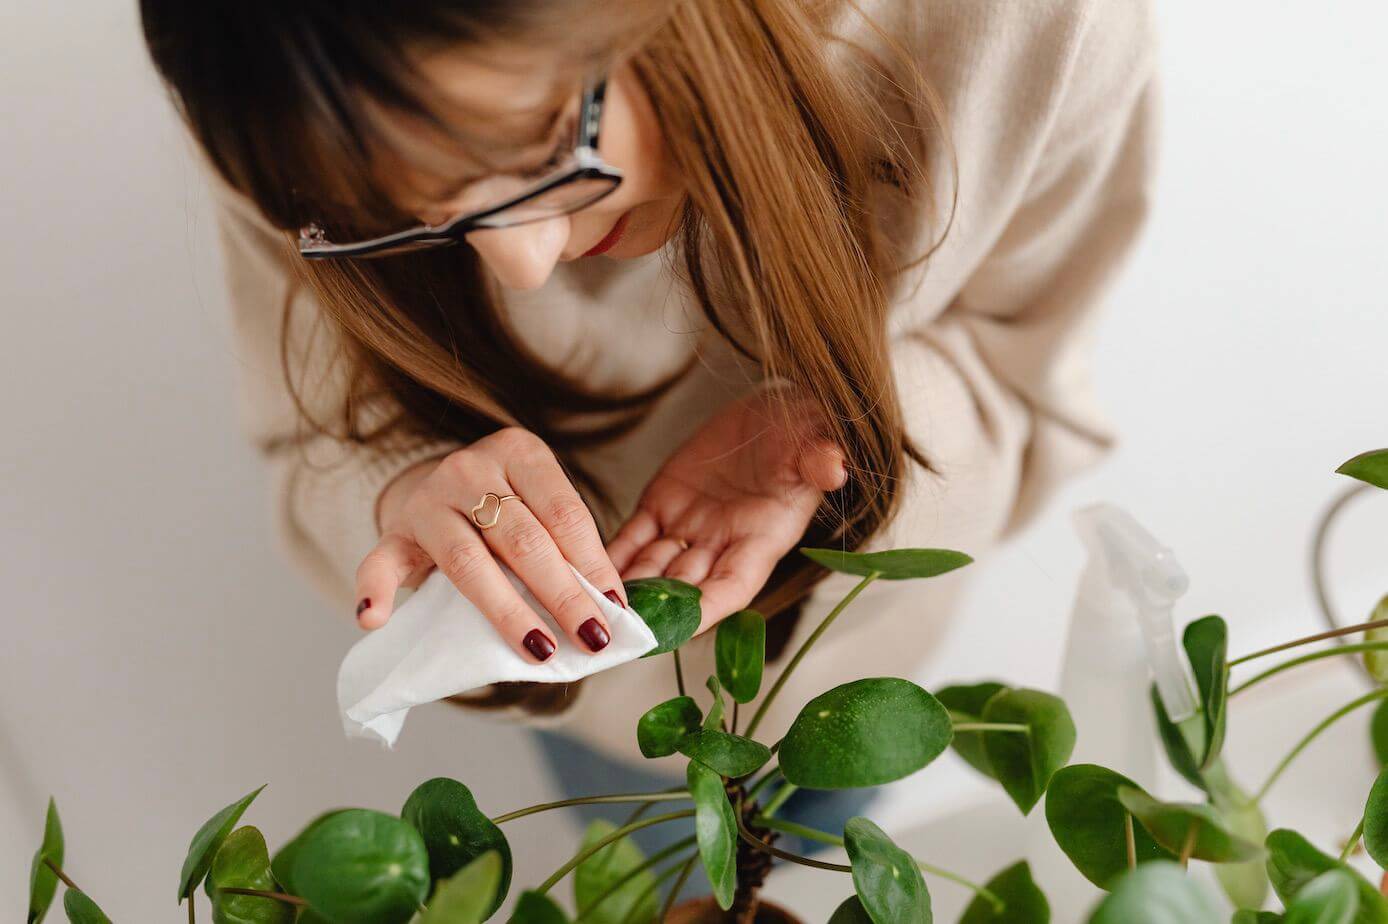 woman cleaning an artificial plant